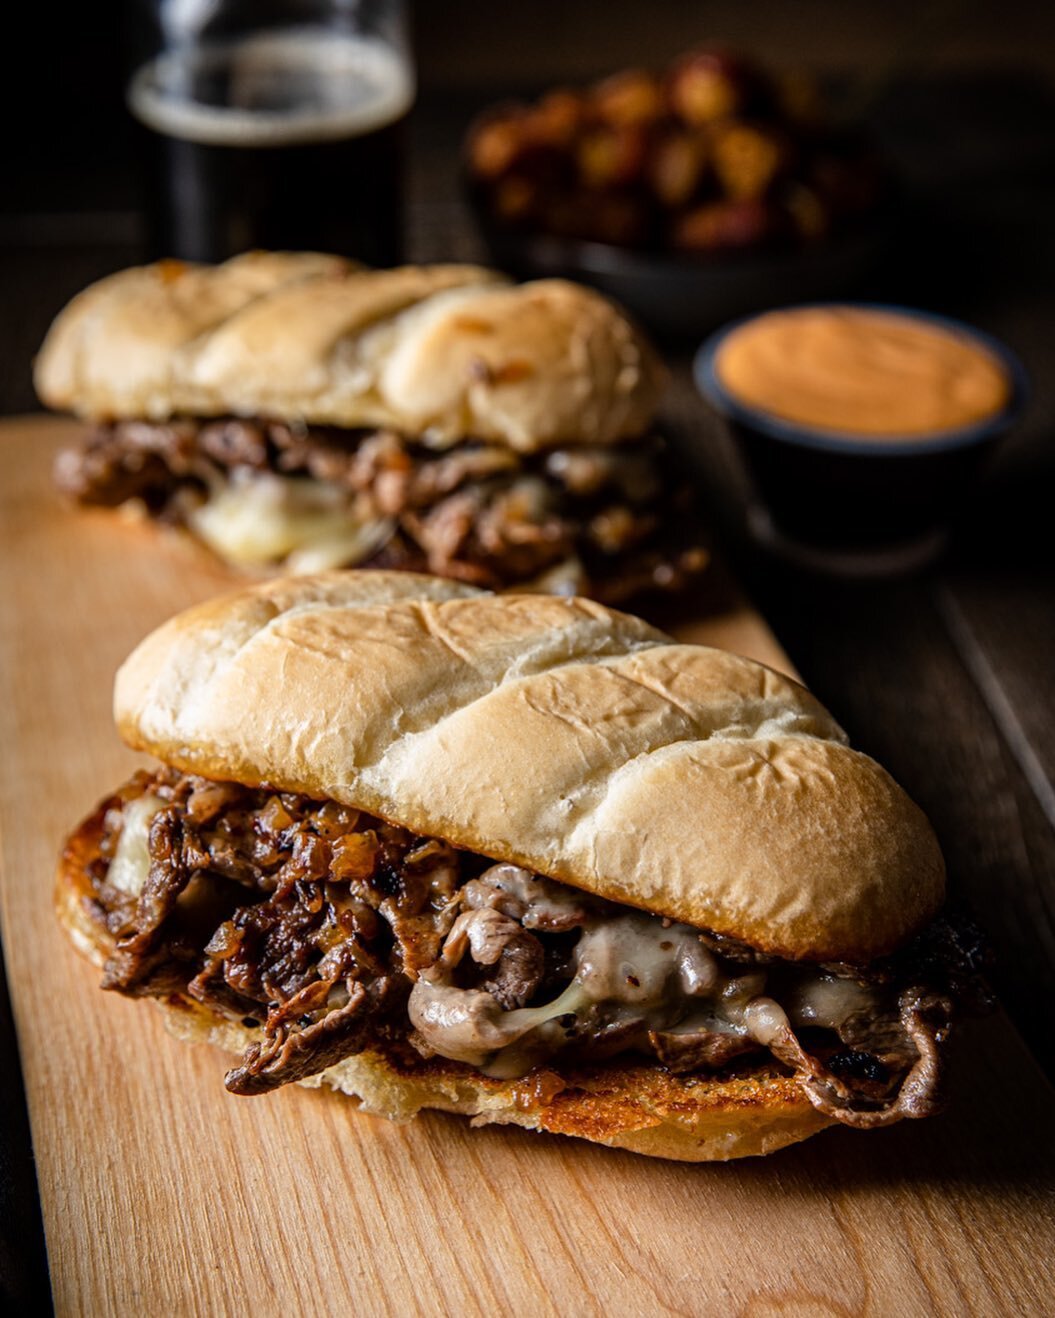 When you want a ribeye, but also onions, cheese, and a roll. #cheesesteak